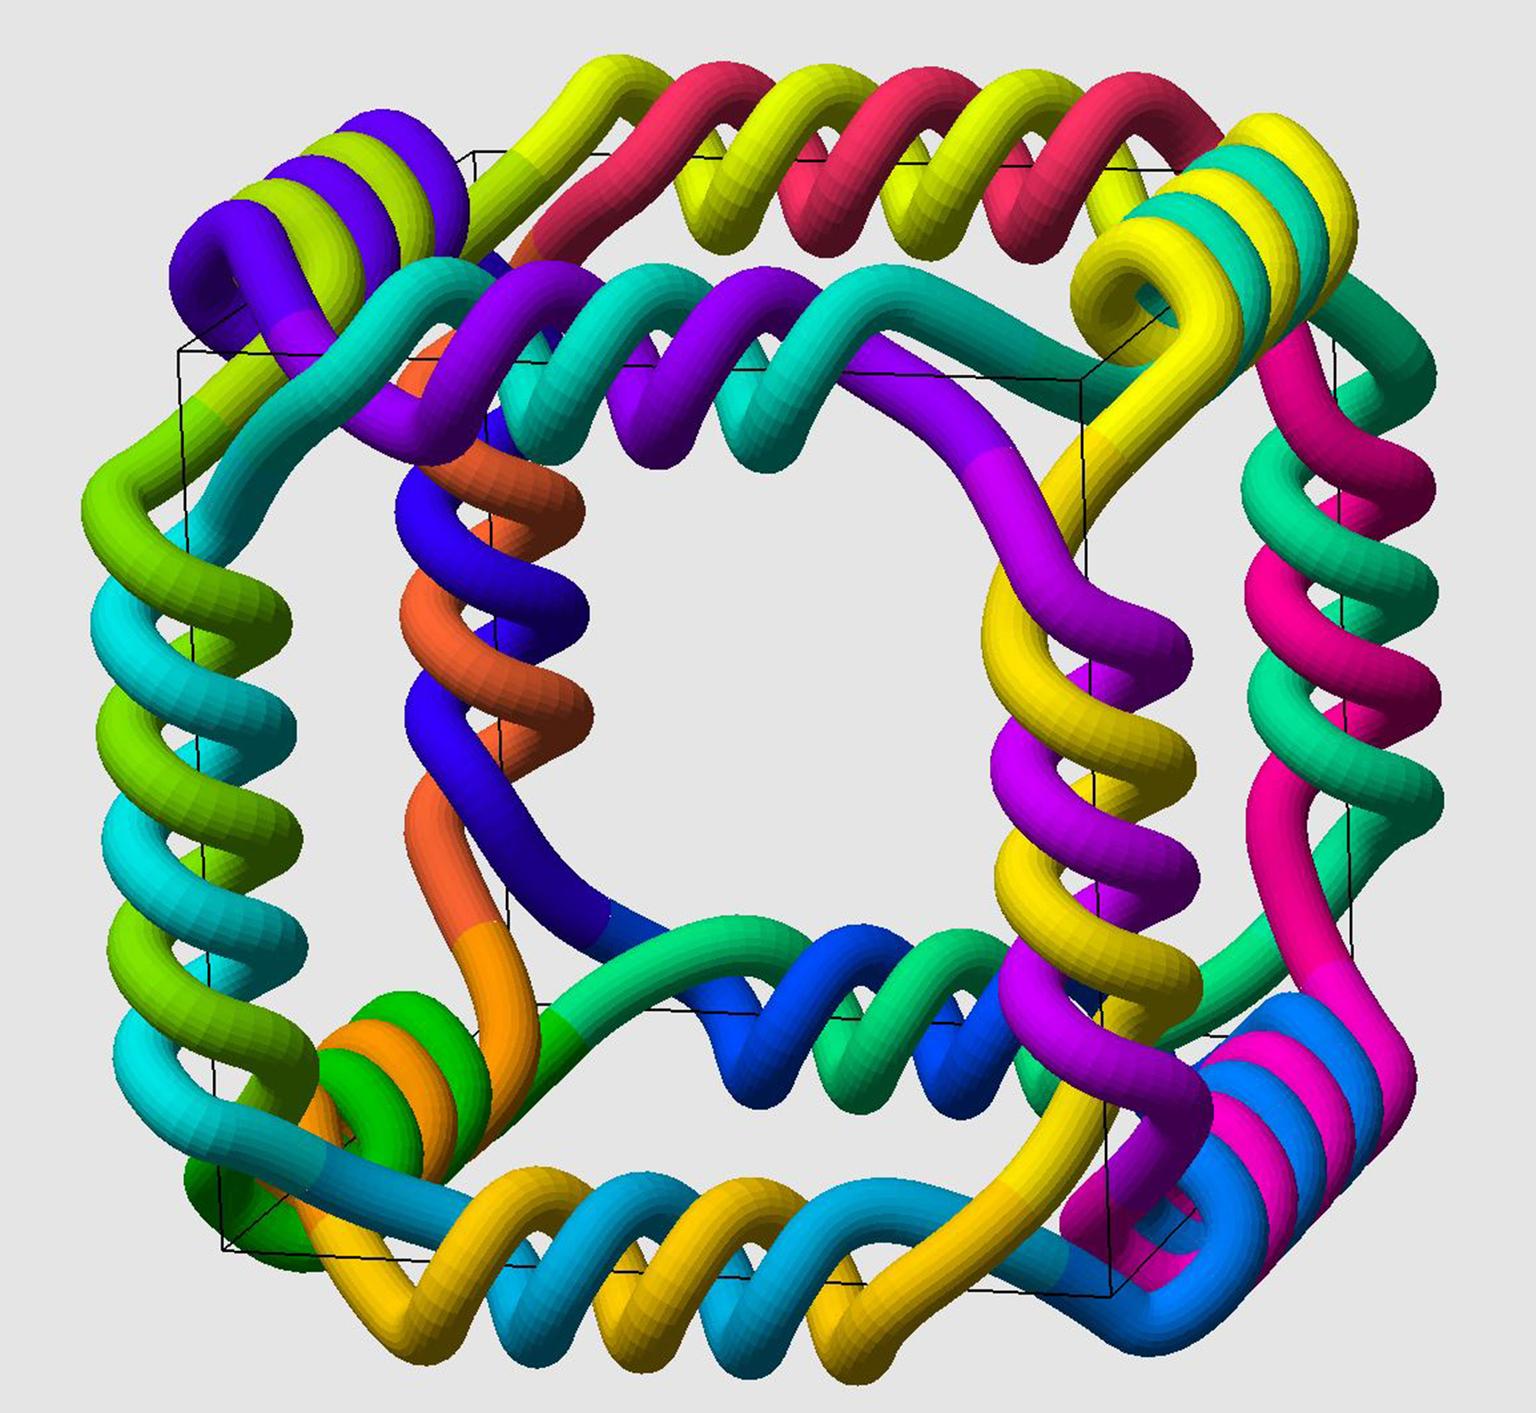 Image for entry 'Cube Double-Frame Knot'